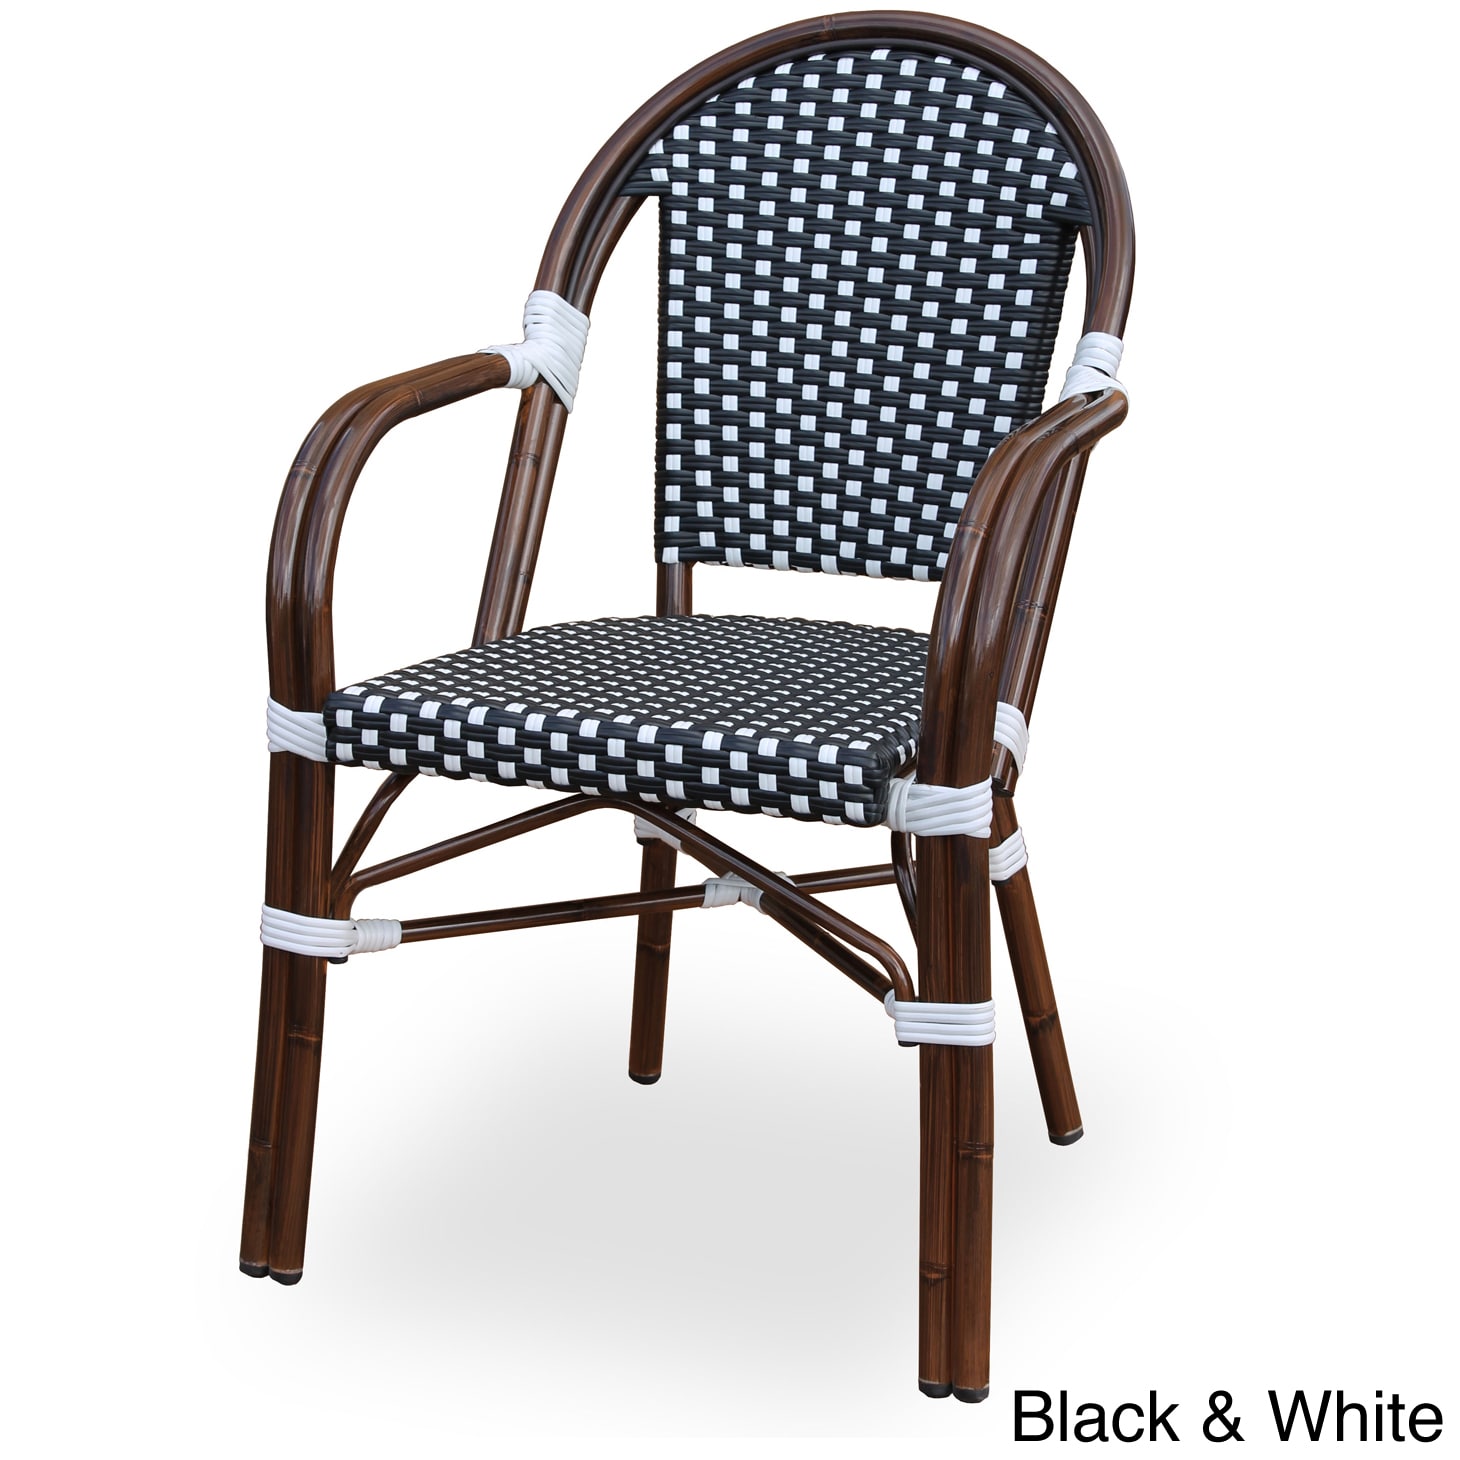 Paris Arm Chair (Cream/chocolate, black/whiteMaterials Powder coated aluminum, resin wicker (HD polyethylene)Finish Cream and chocolate, black and white resin wickerWeather resistantUV protectionLightweight yet very durable and stackableRattan is made f